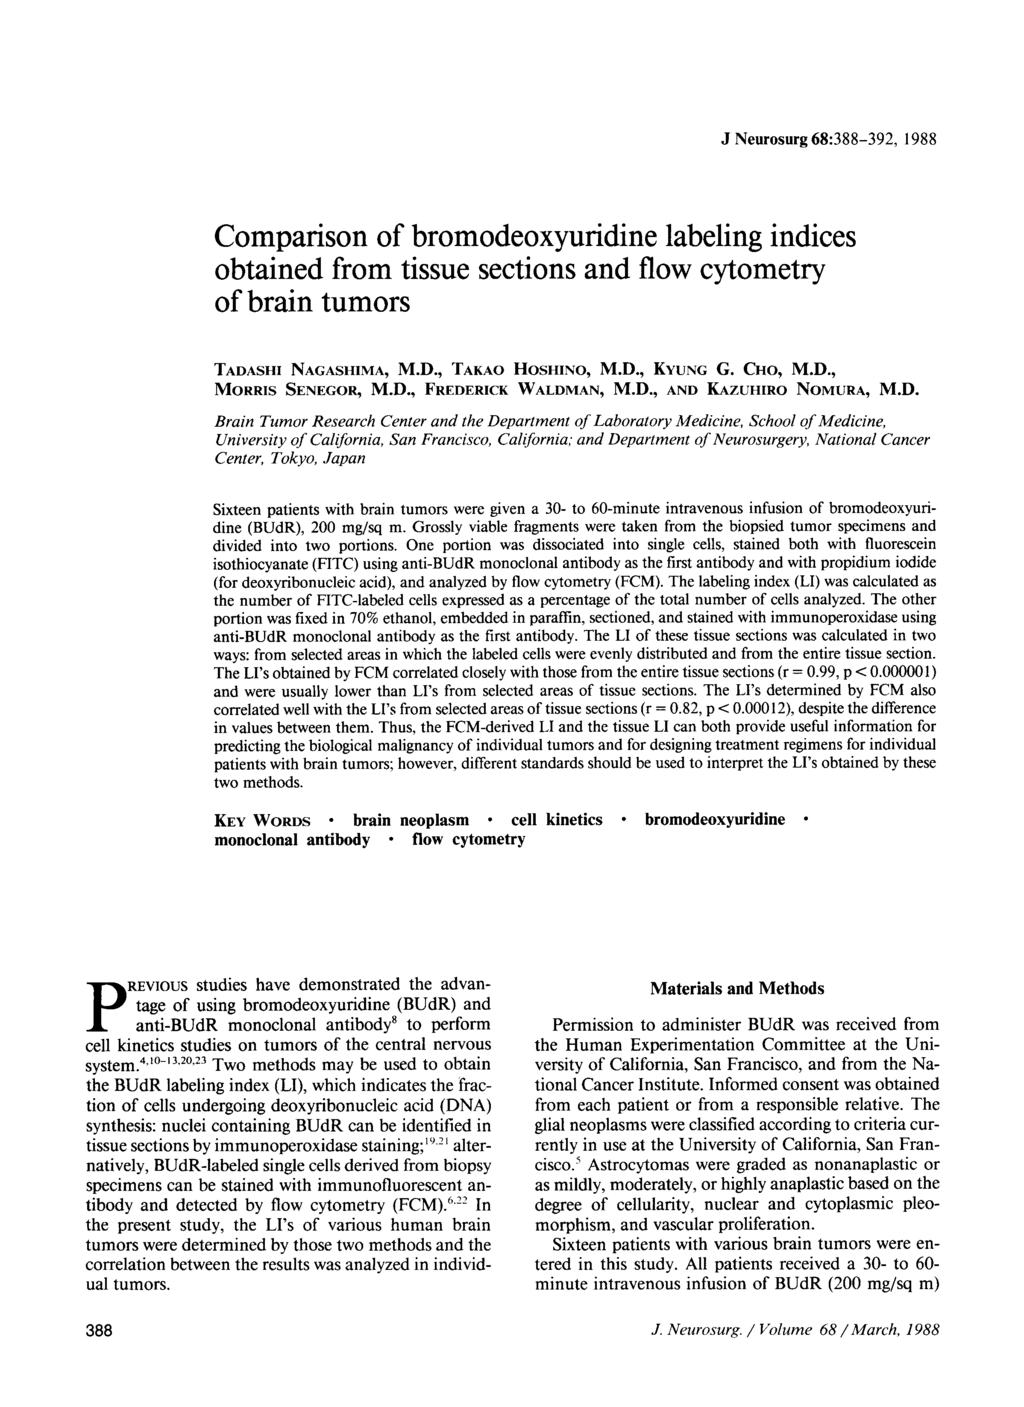 J Neurosurg 68:388-392, 1988 Comparison of bromodeoxyuridine labeling indices obtained from tissue sections and flow cytometry of brain tumors TADASHI NAGASHIMA, M.D., TAKAO HOSHINO, M.D., KYUNG G.